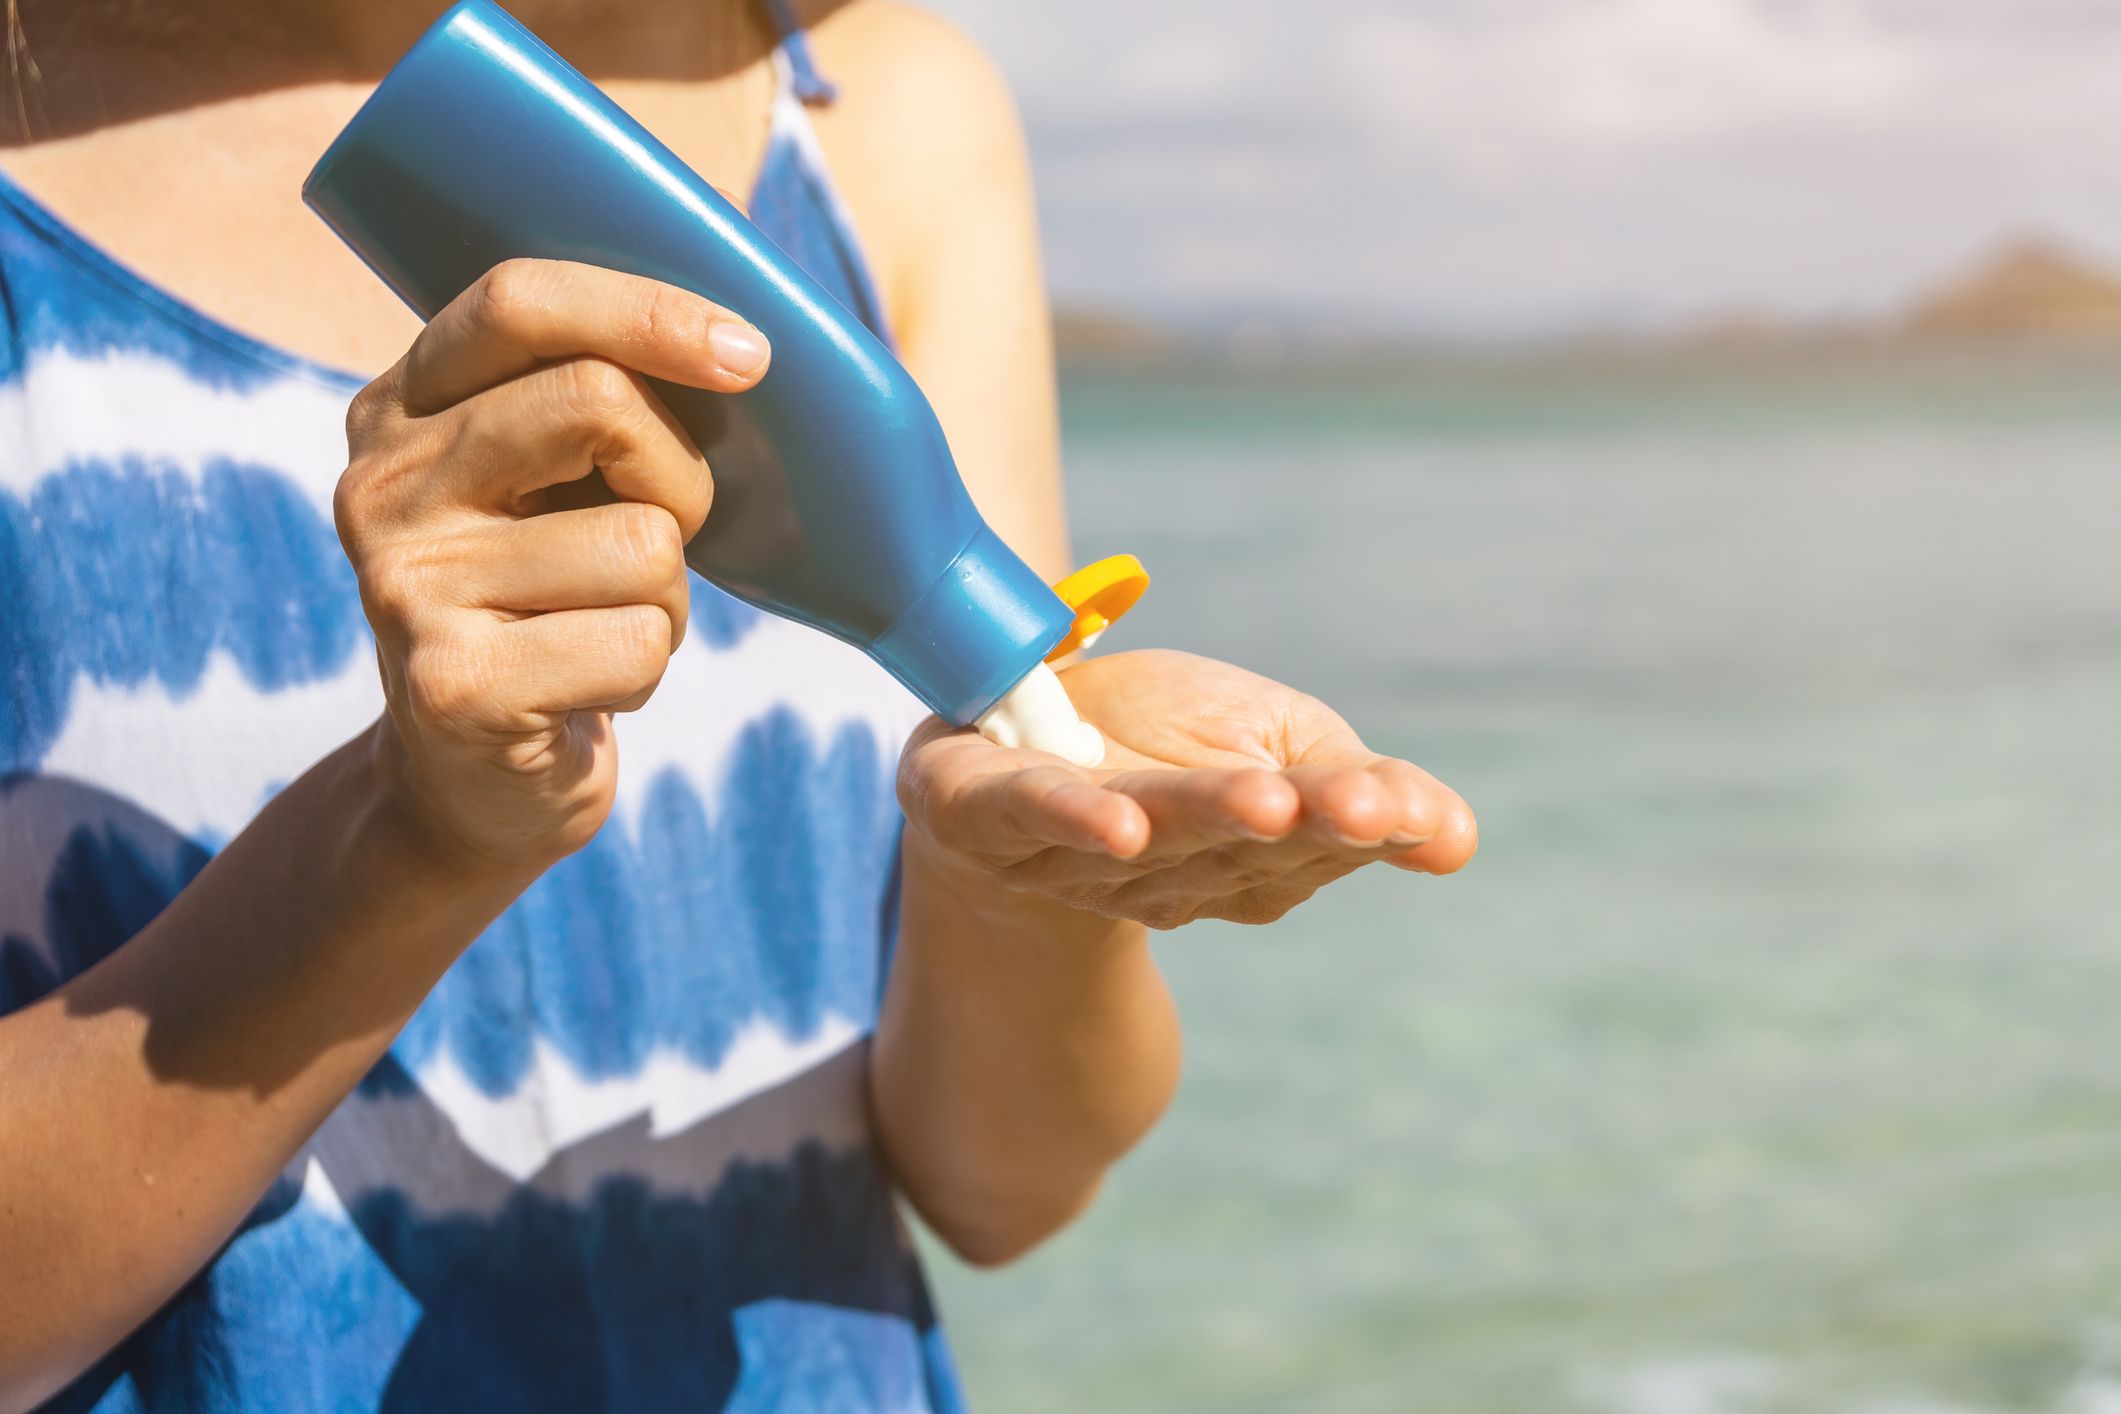 mineral sunscreen versus chemical sunscreen